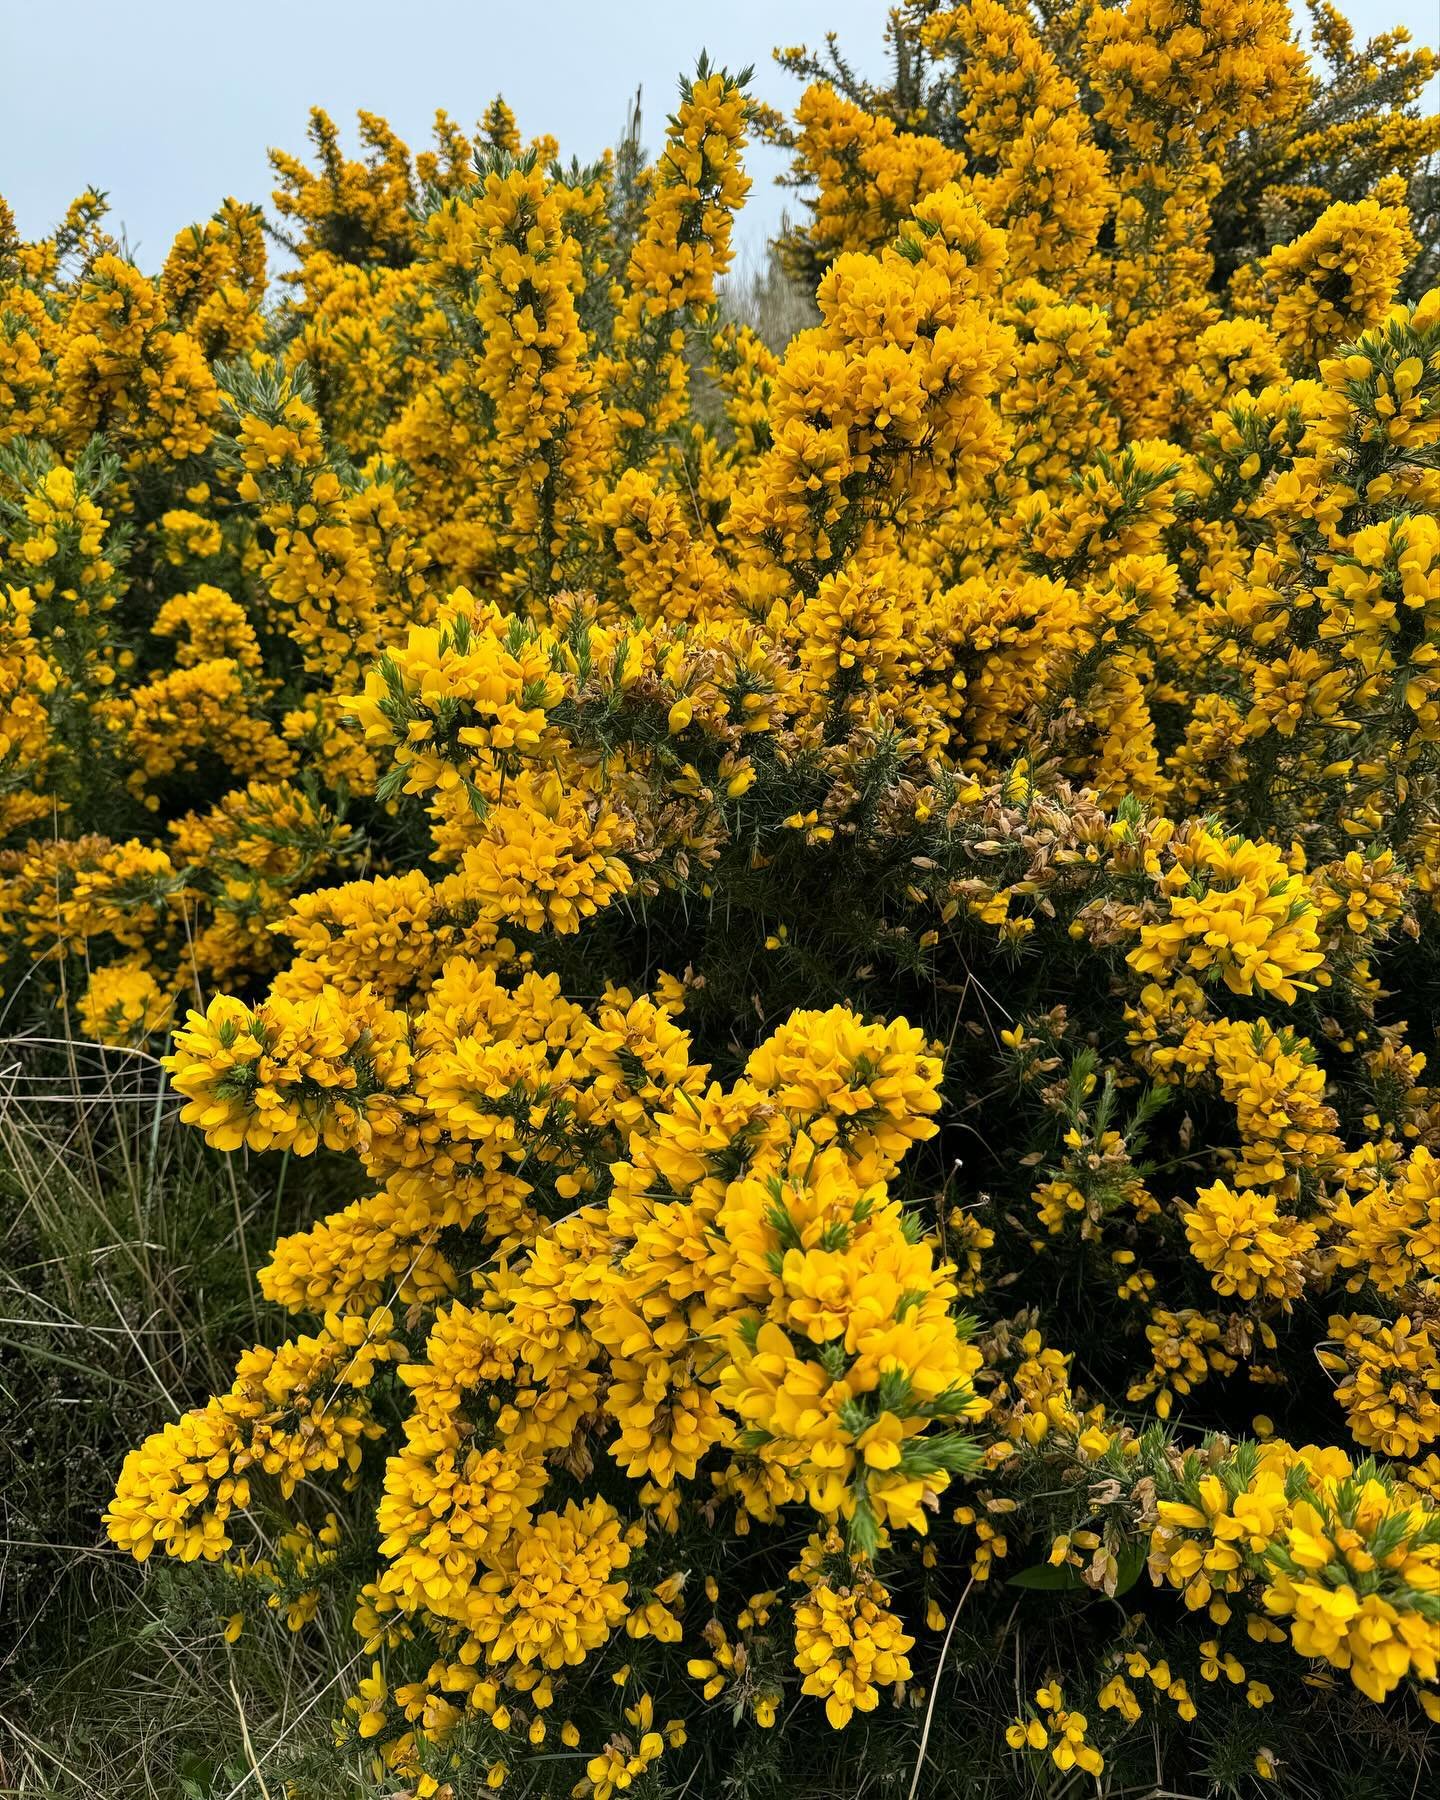 Day off with Mr Herbal storyteller and the spaniel at Tentsmuir beach&hellip;coconut scented gorse is in bloom so kissing is also in season🤭💫💚🌿

#daysoffvibes #scotland #gorse #plantlore